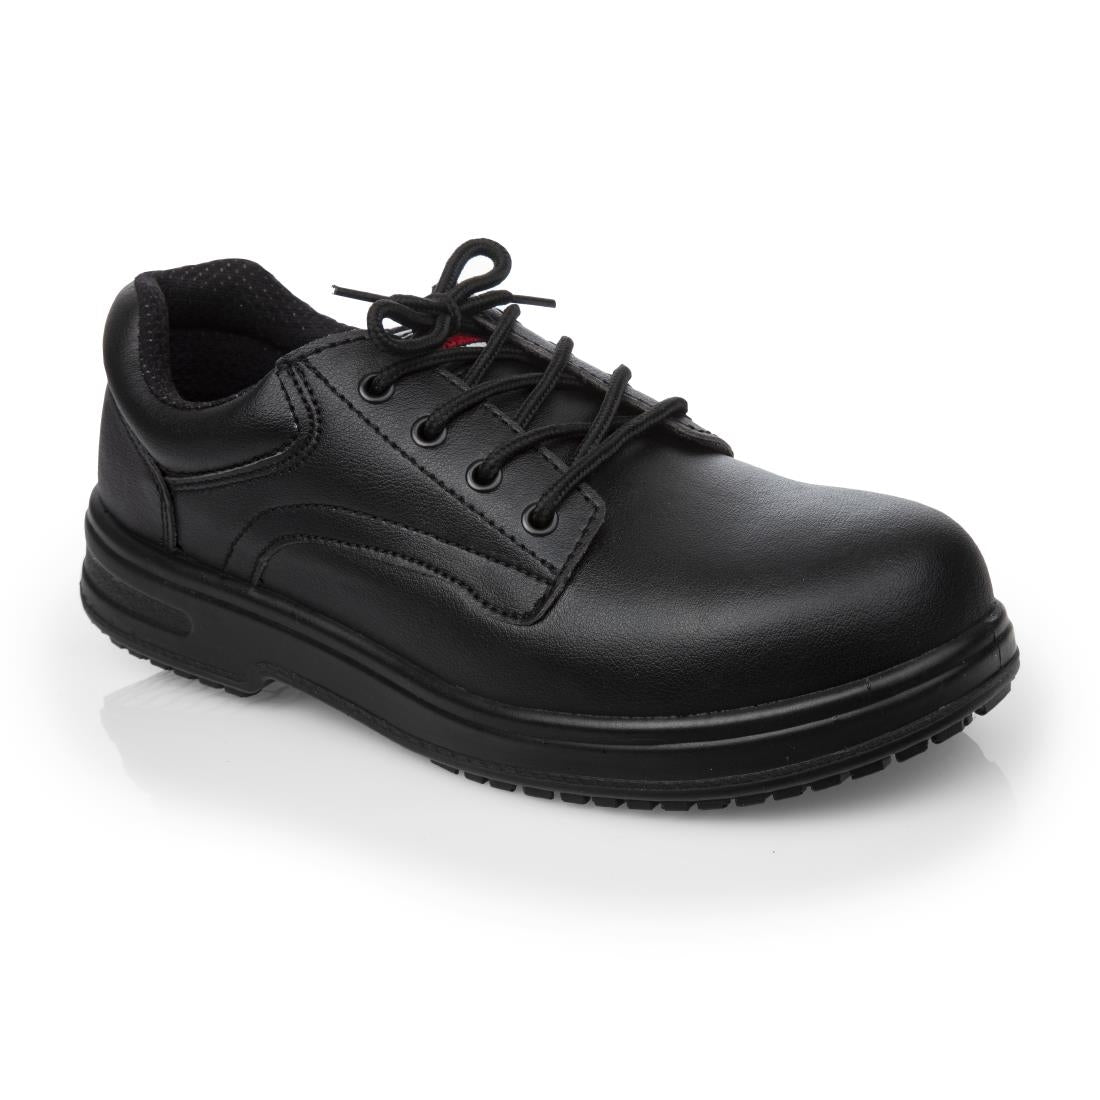 BB497-40 Slipbuster Basic Toe Cap Safety Shoes Black 40 JD Catering Equipment Solutions Ltd